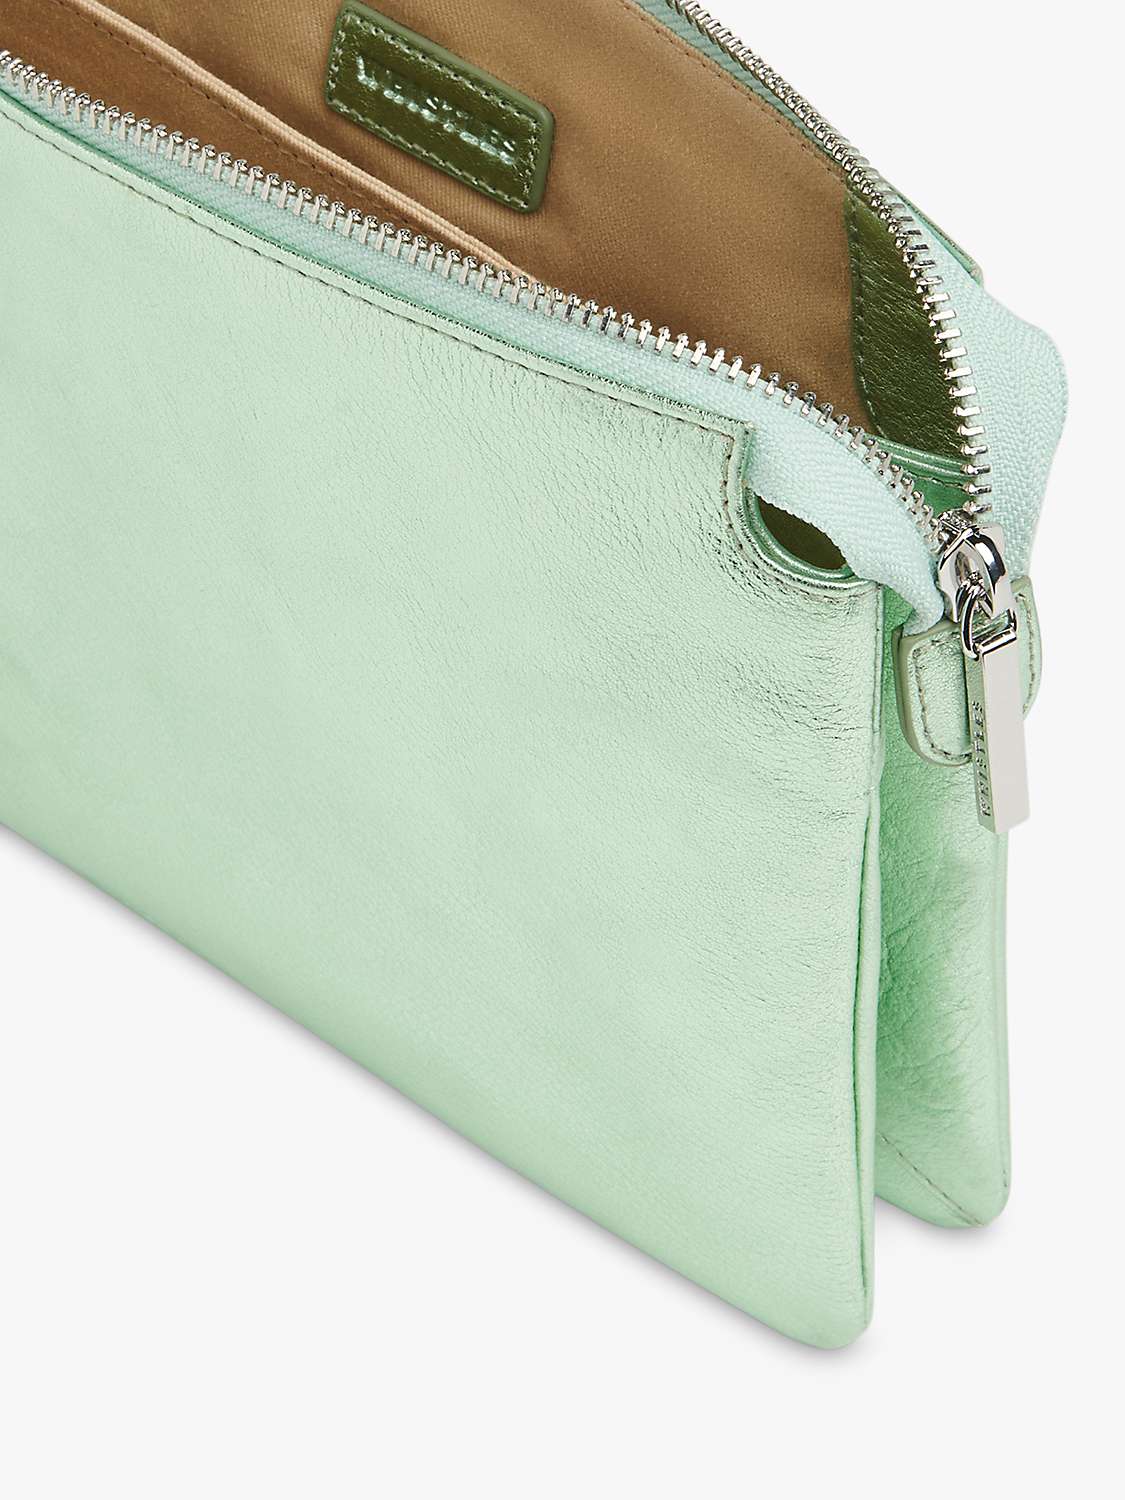 Whistles Elita Leather Double Pouch Clutch Bag, Green at John Lewis ...